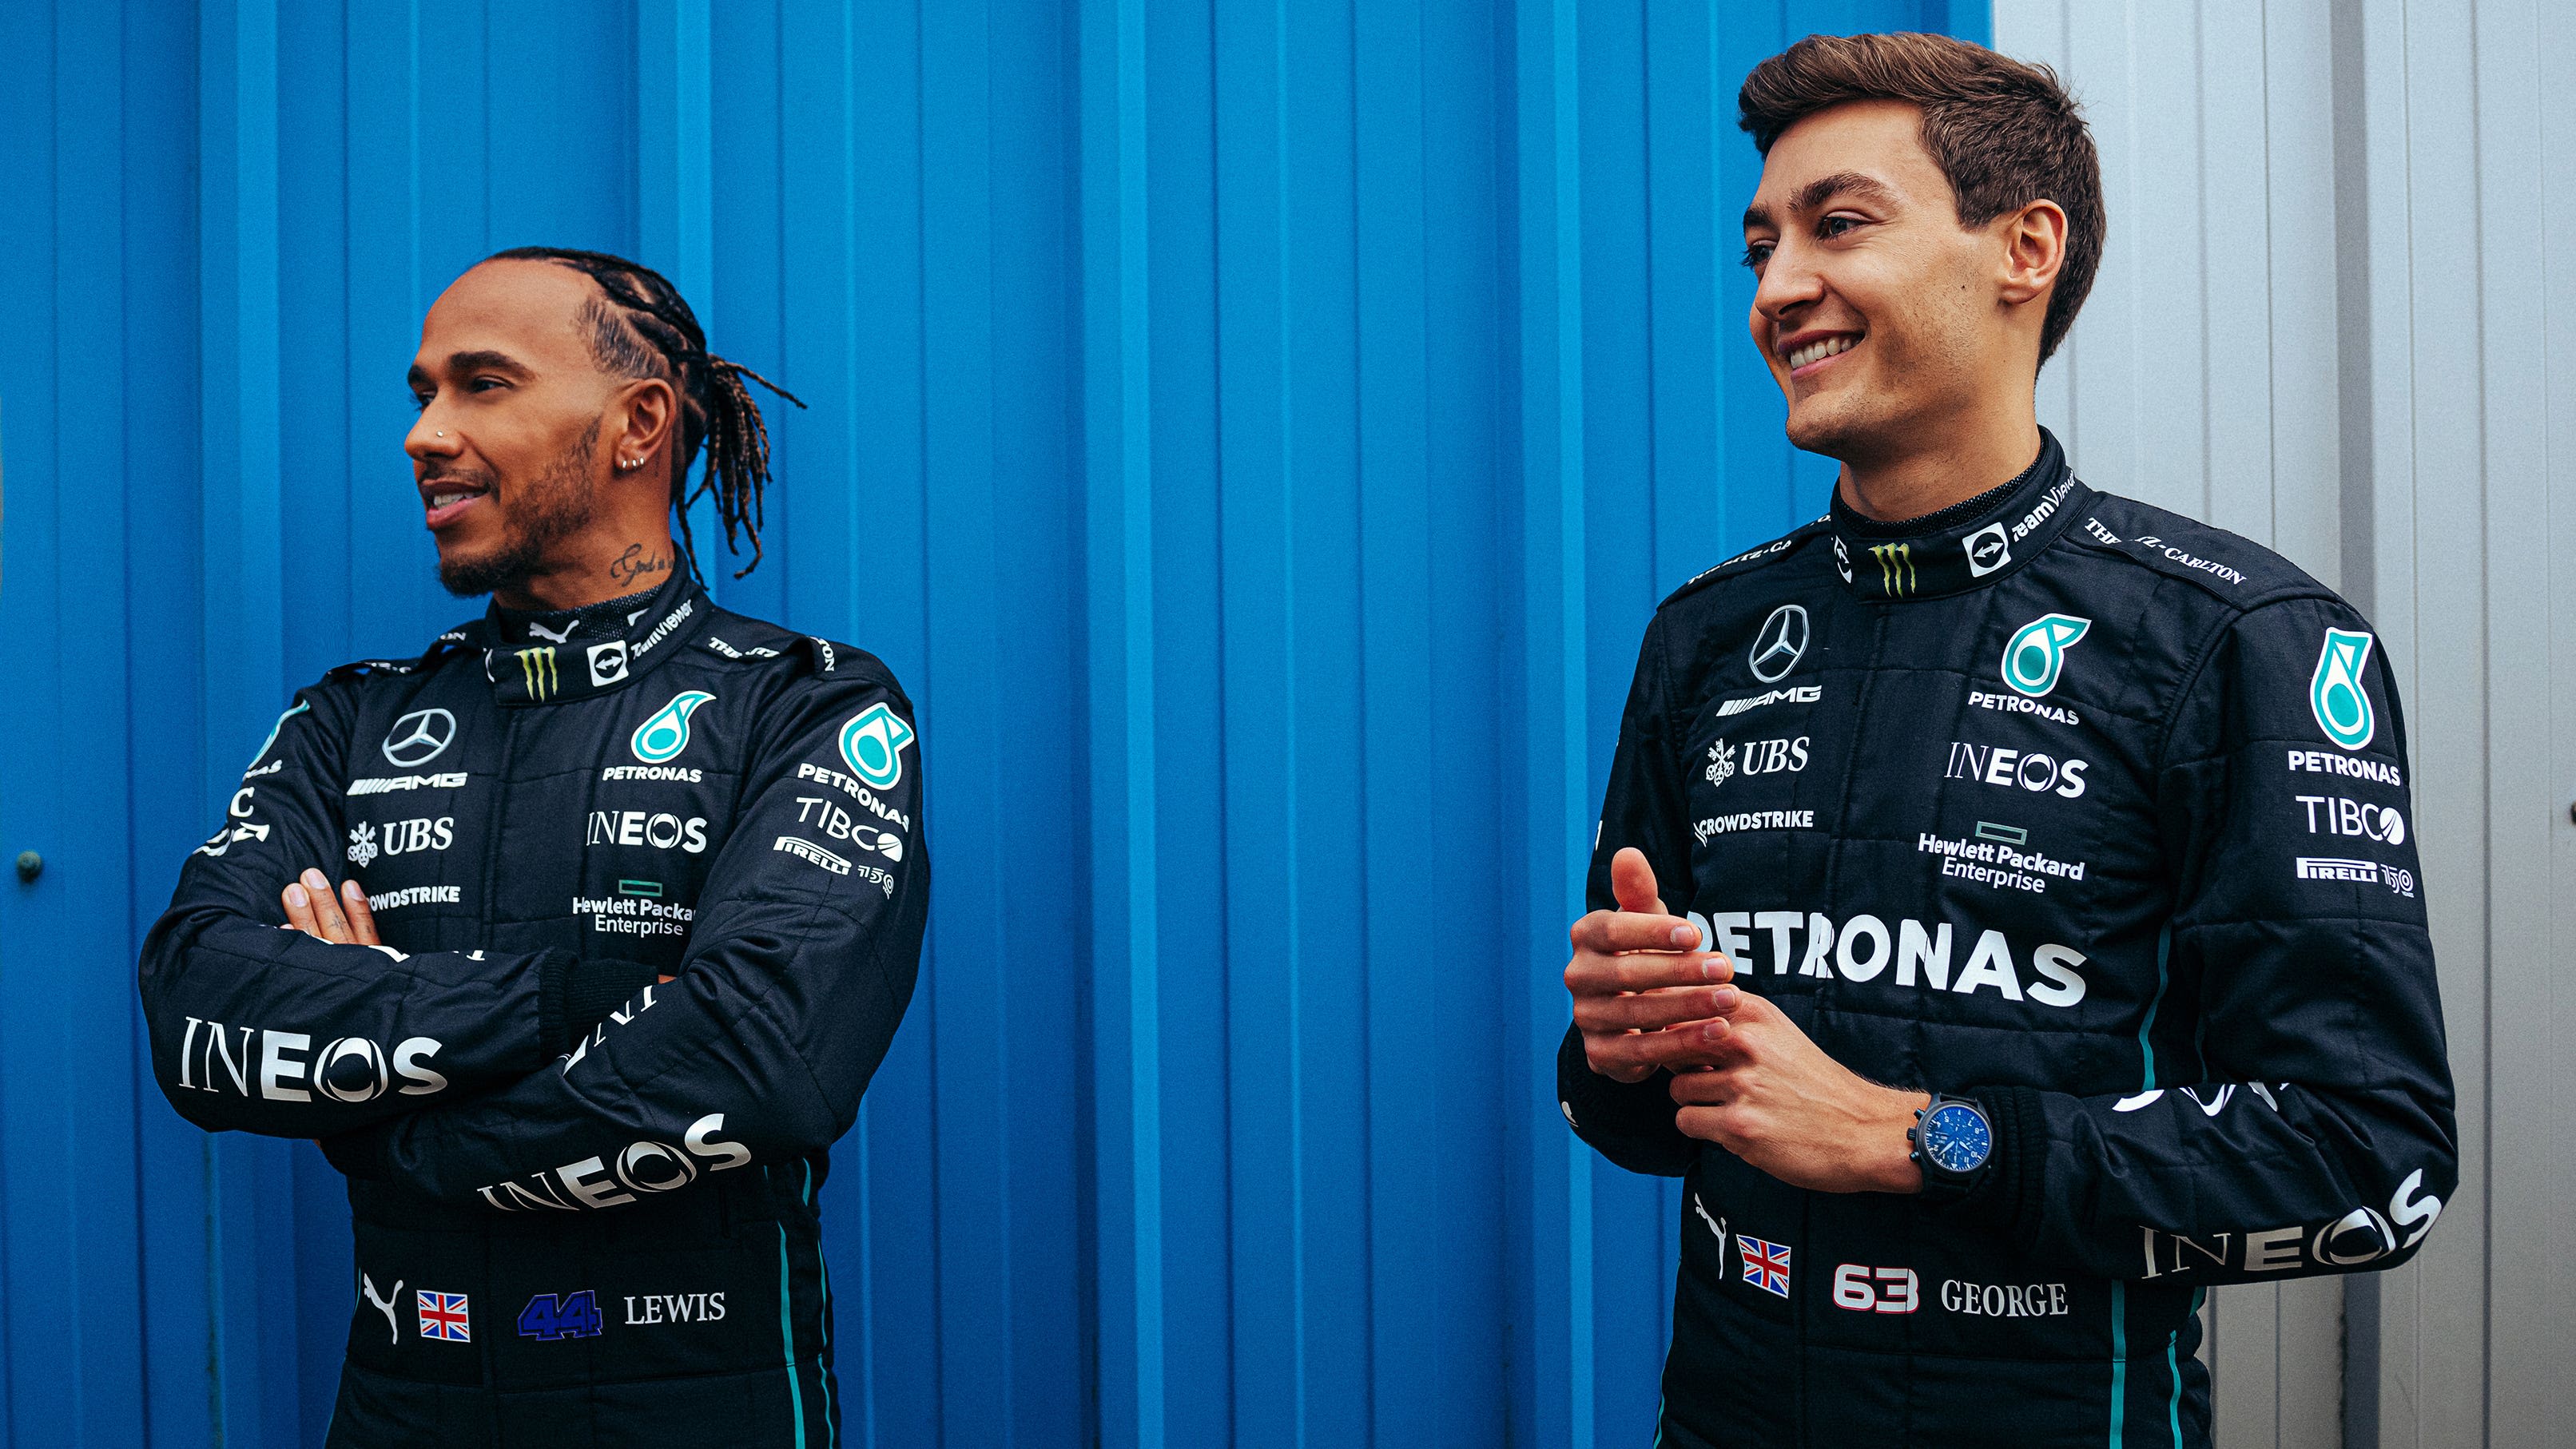 Lewis Hamilton and George Russell treated equally at Mercedes – Toto Wolff